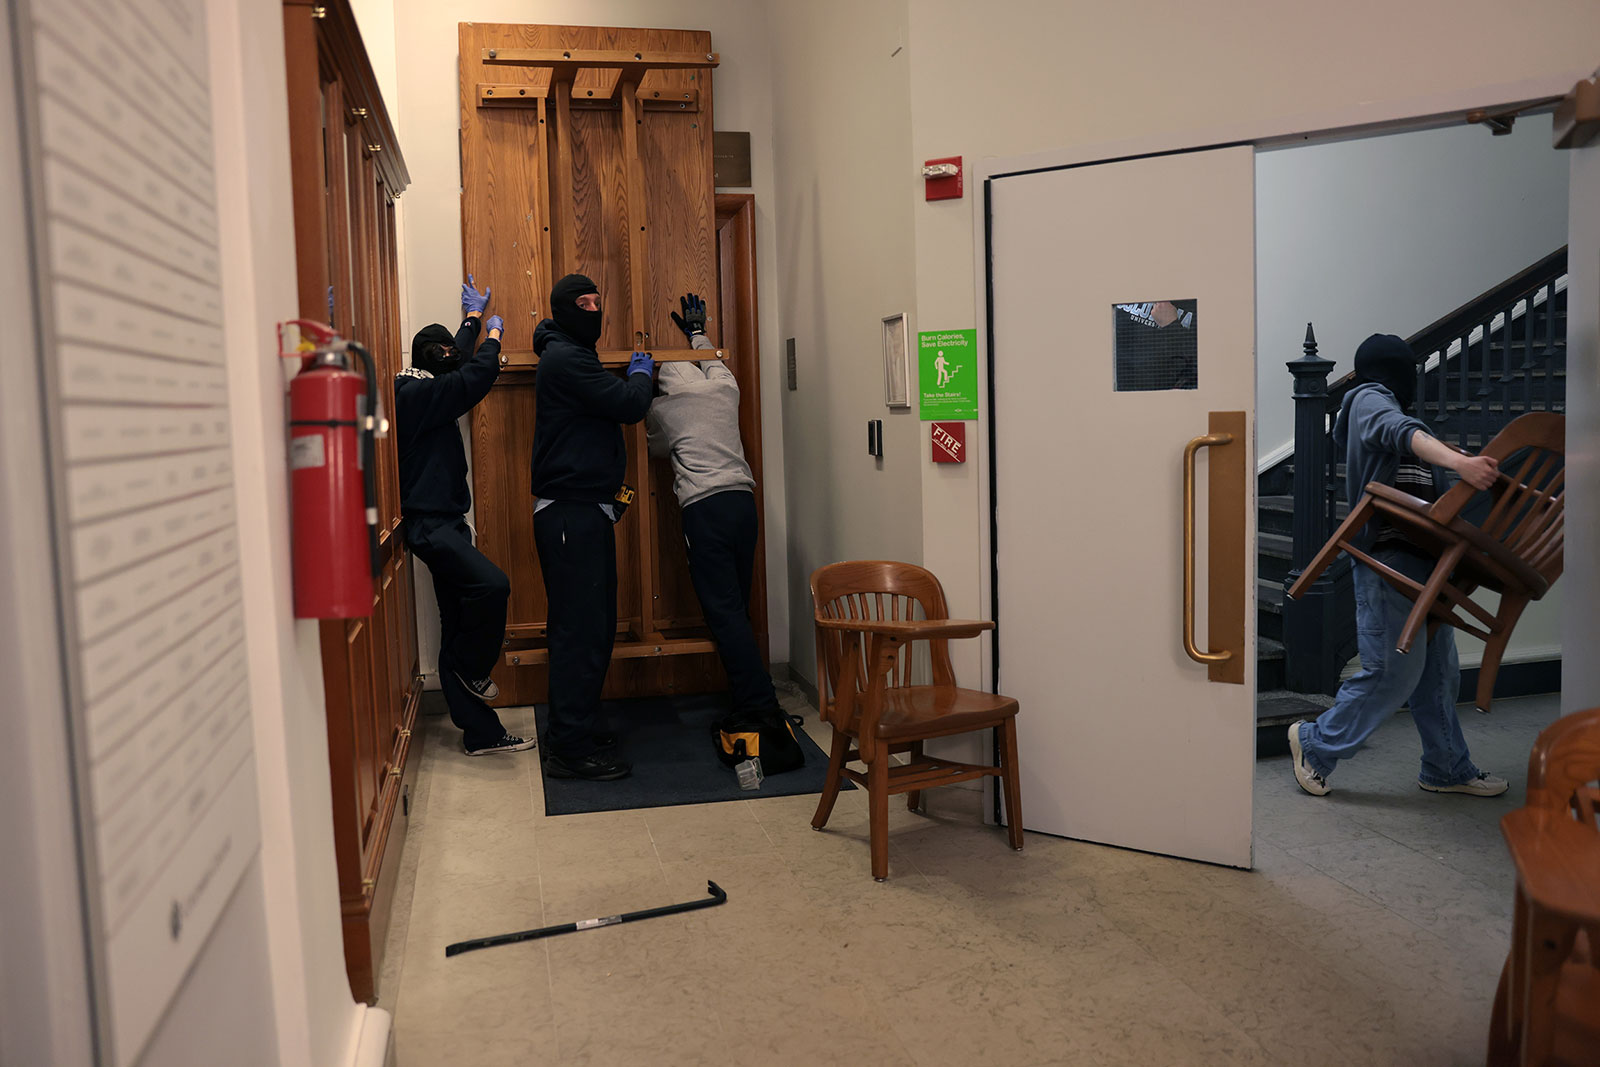 Demonstrators barricade themselves inside Hamilton Hall at Colombia University on April 30 in New York.